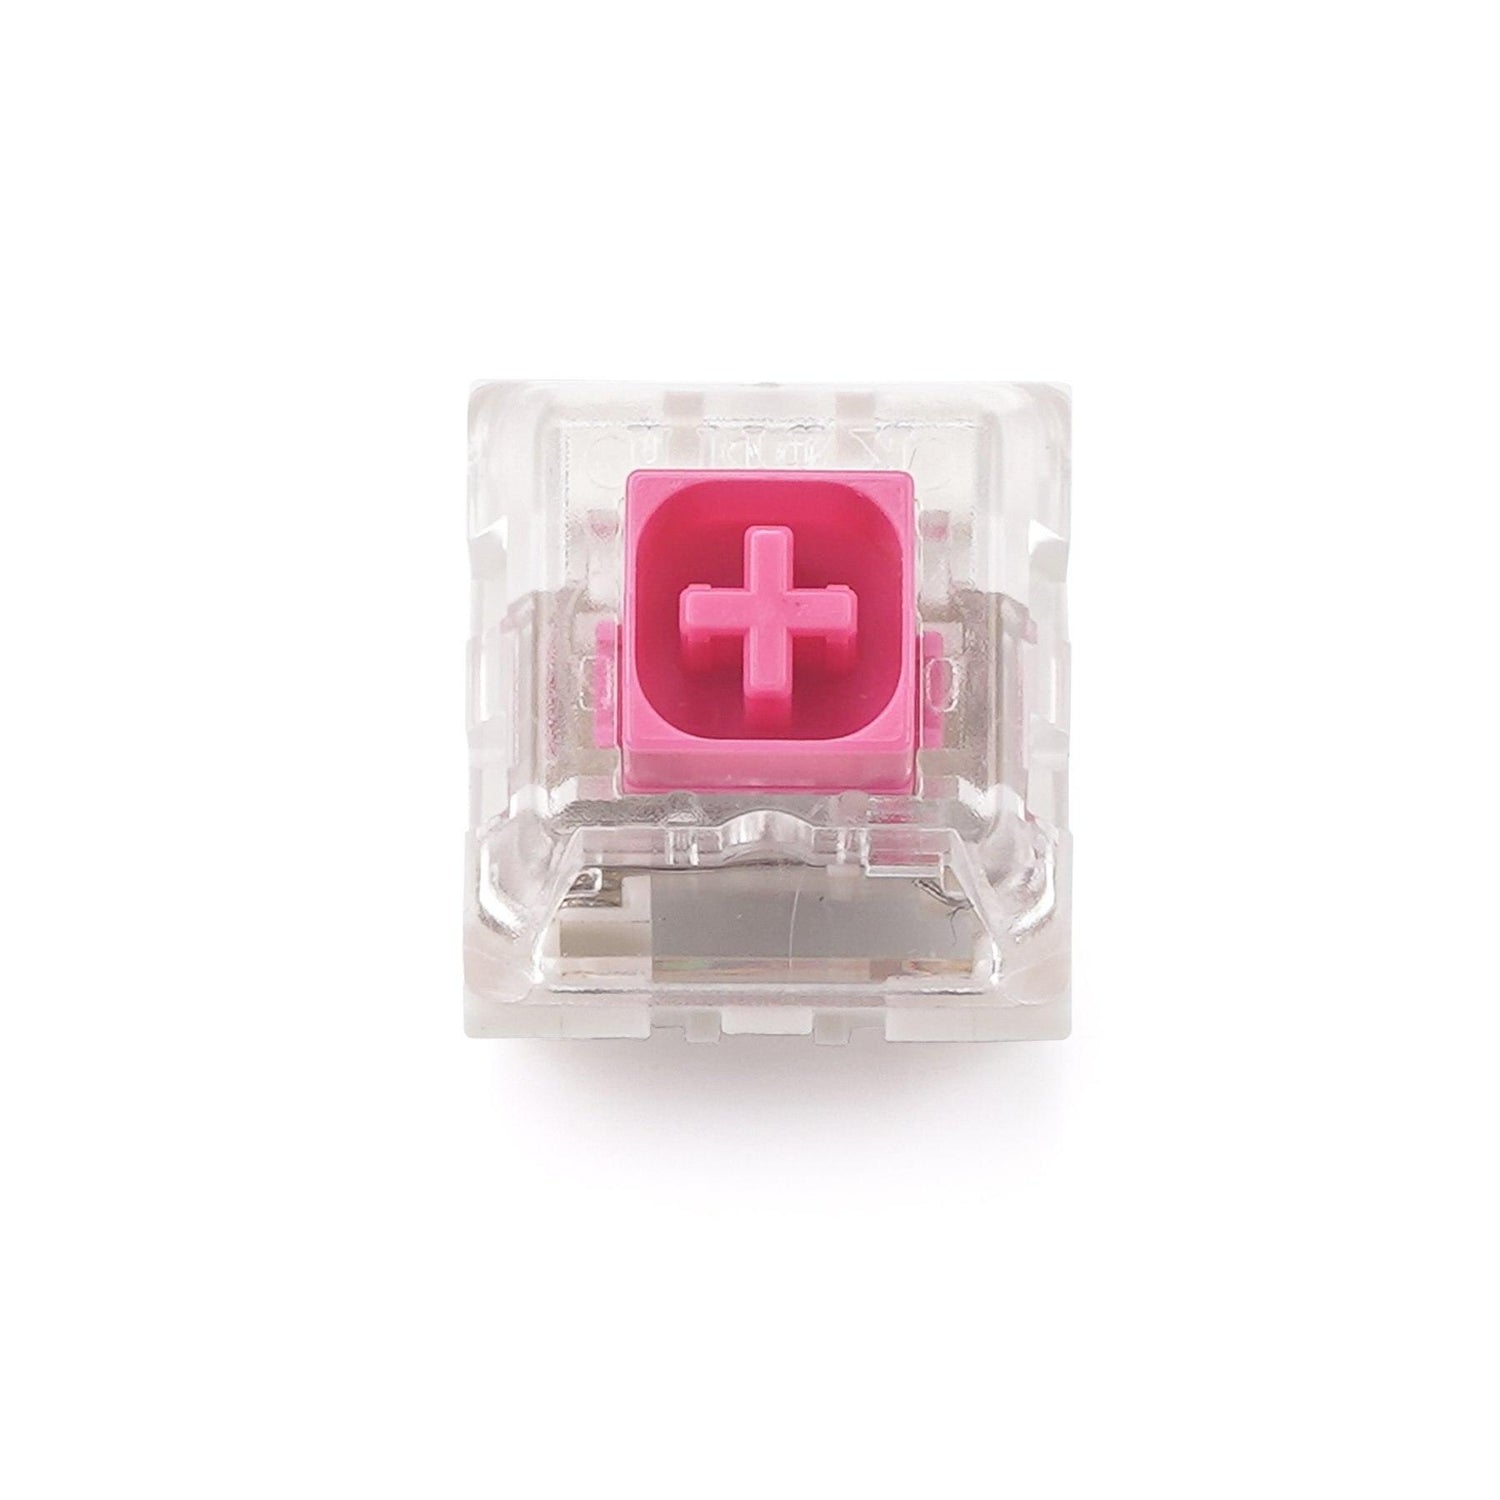 NOVELKEYS X KAILH BOX PINK CLICKY SWITCHES - THE KEYCAP CLUB